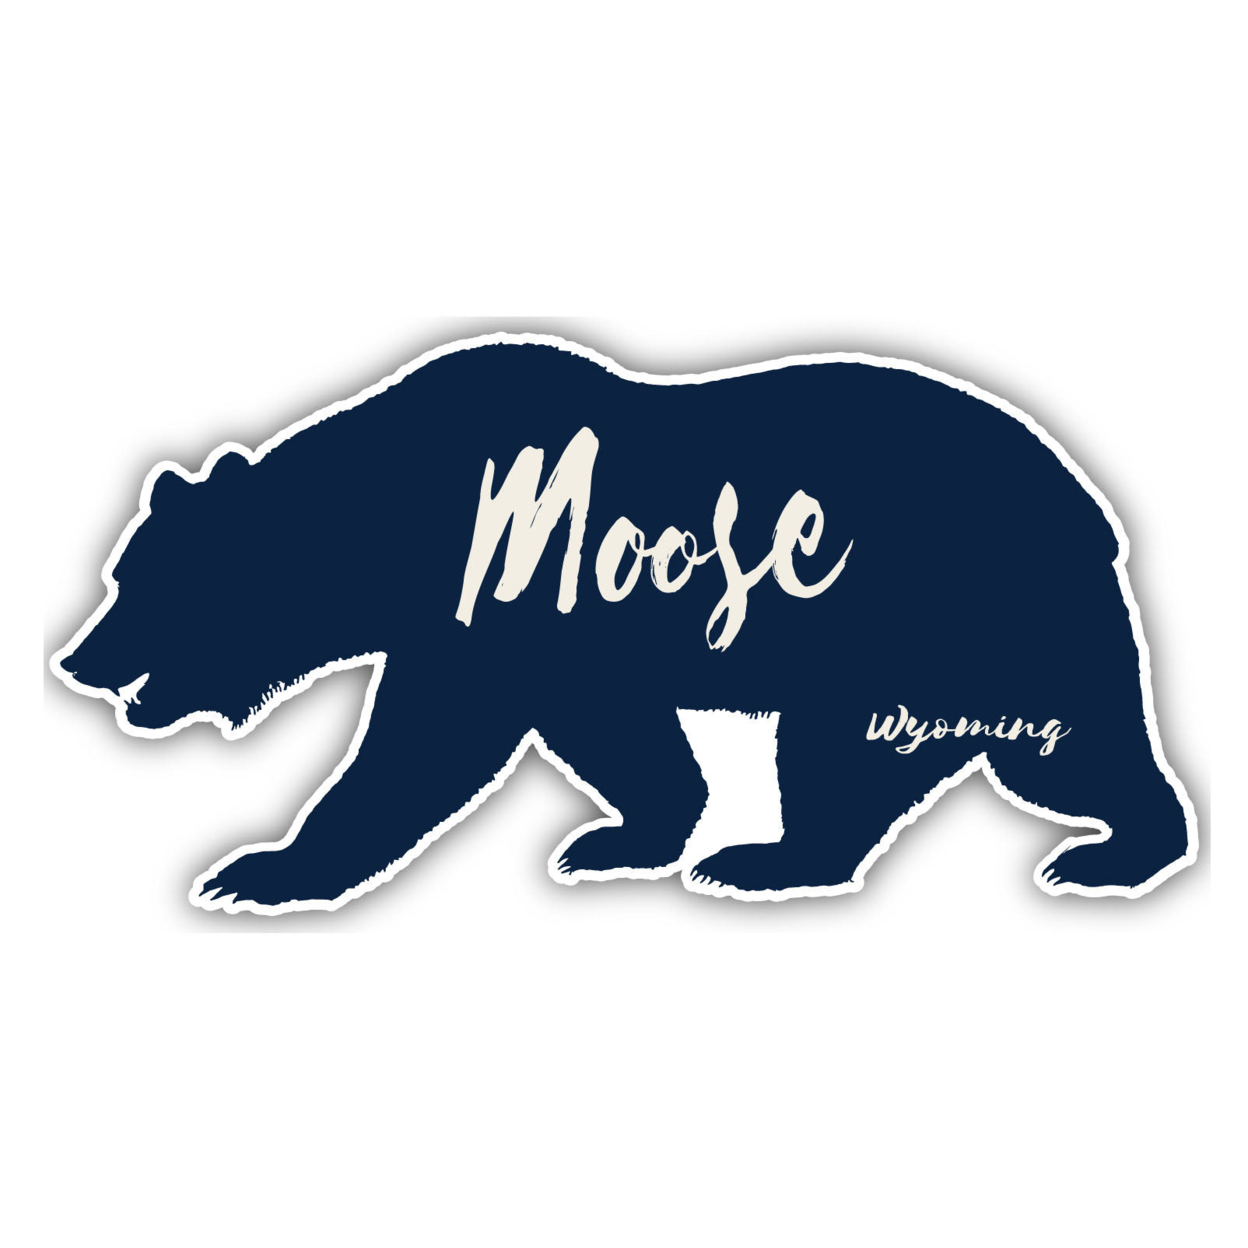 Moose Wyoming Souvenir Decorative Stickers (Choose Theme And Size) - Single Unit, 4-Inch, Bear